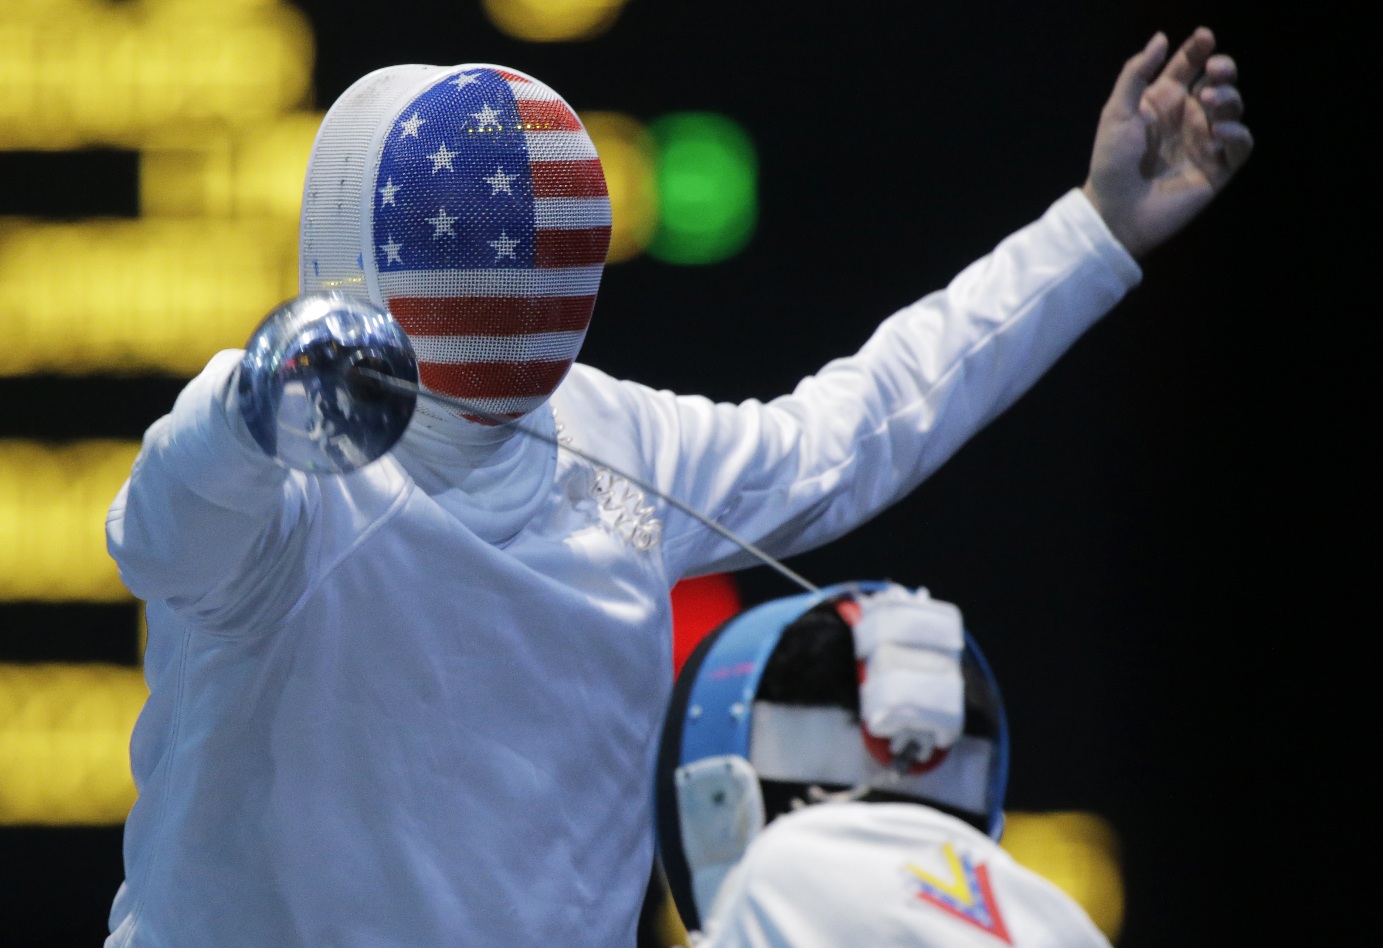 Vancouver's Seth Kelsey, left, competes against Venezuela's Silvio Fernandez during the men's individual epee fencing competition at the 2012 Summer Olympics, Wednesday in London.